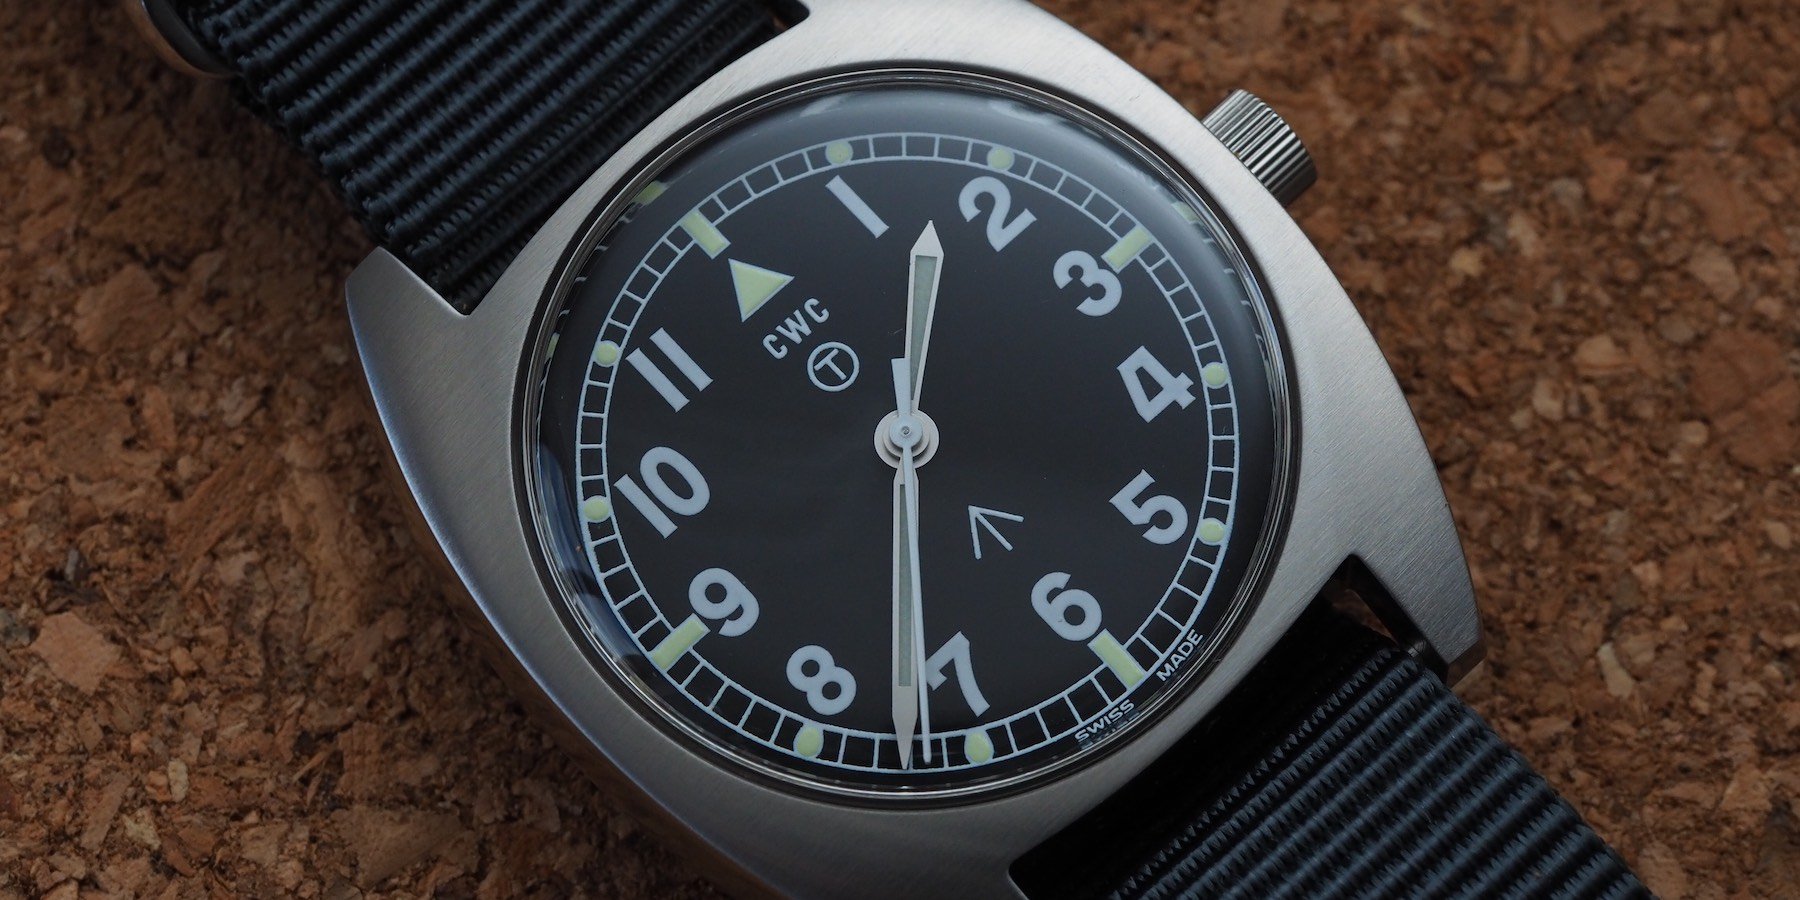 CWC Mellor-72 Mechanical Is A Treat For Military Watch Fans